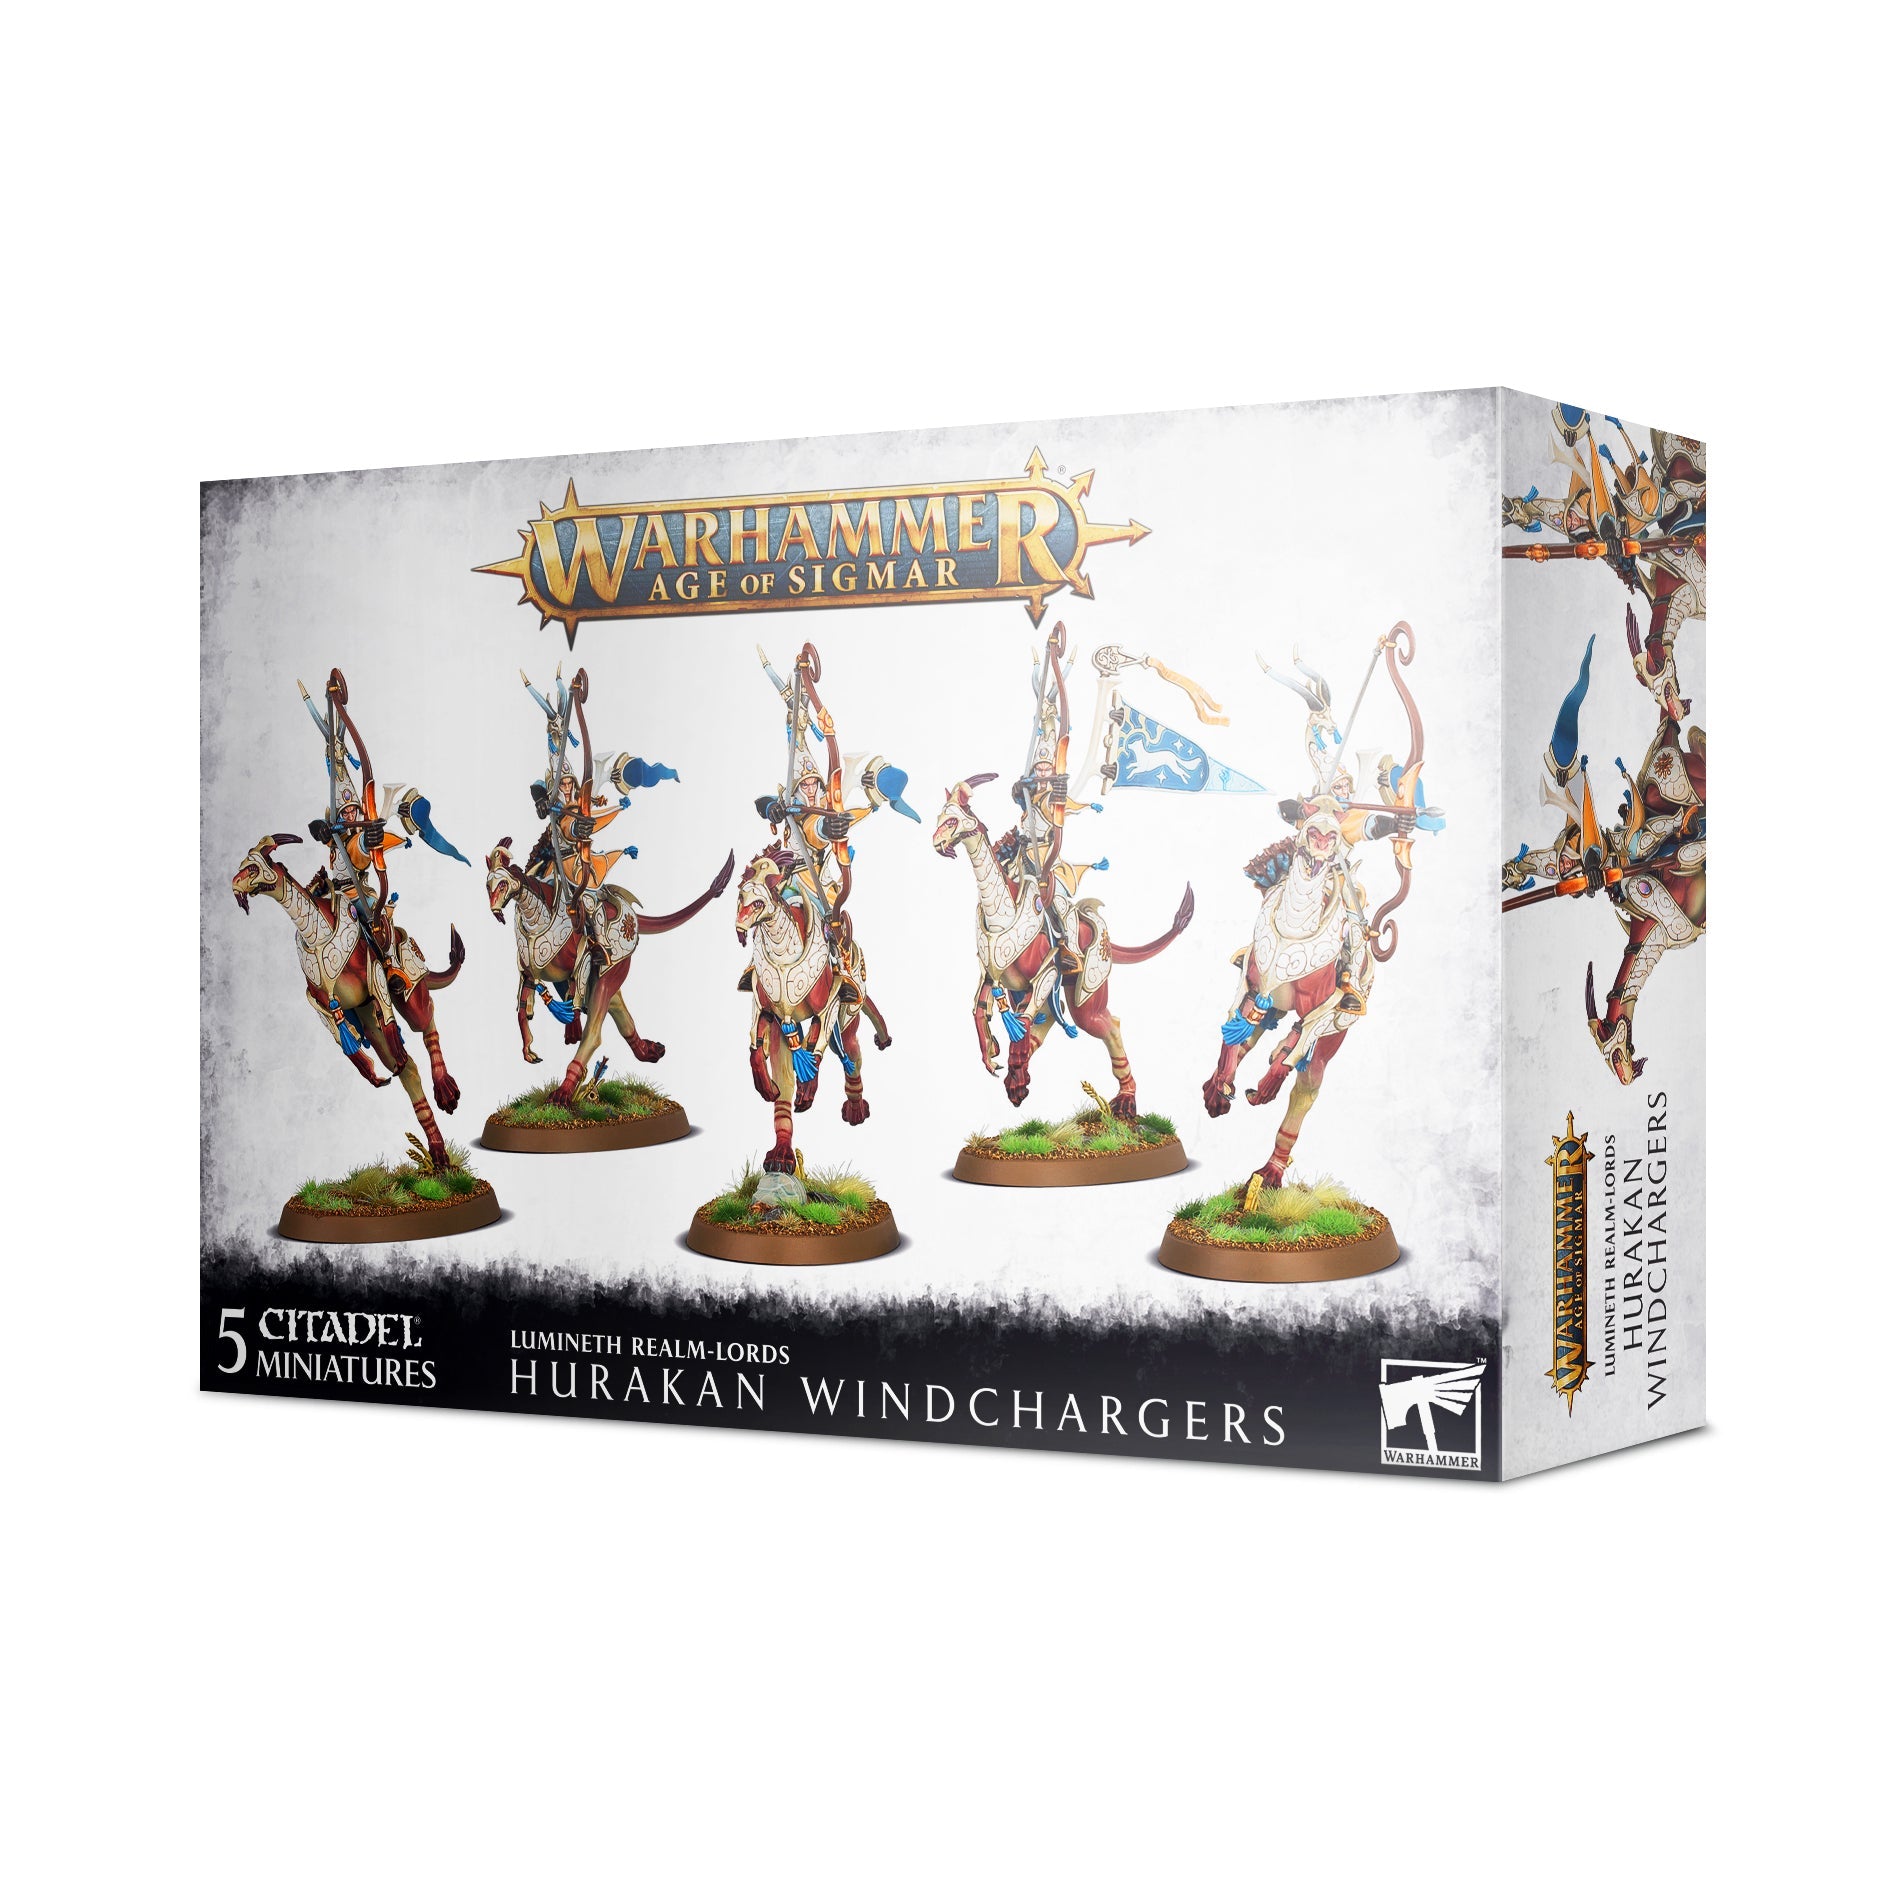 Warhammer Age of Sigmar Lumineth Realm-Lords Hurakan Windchargers Miniatures